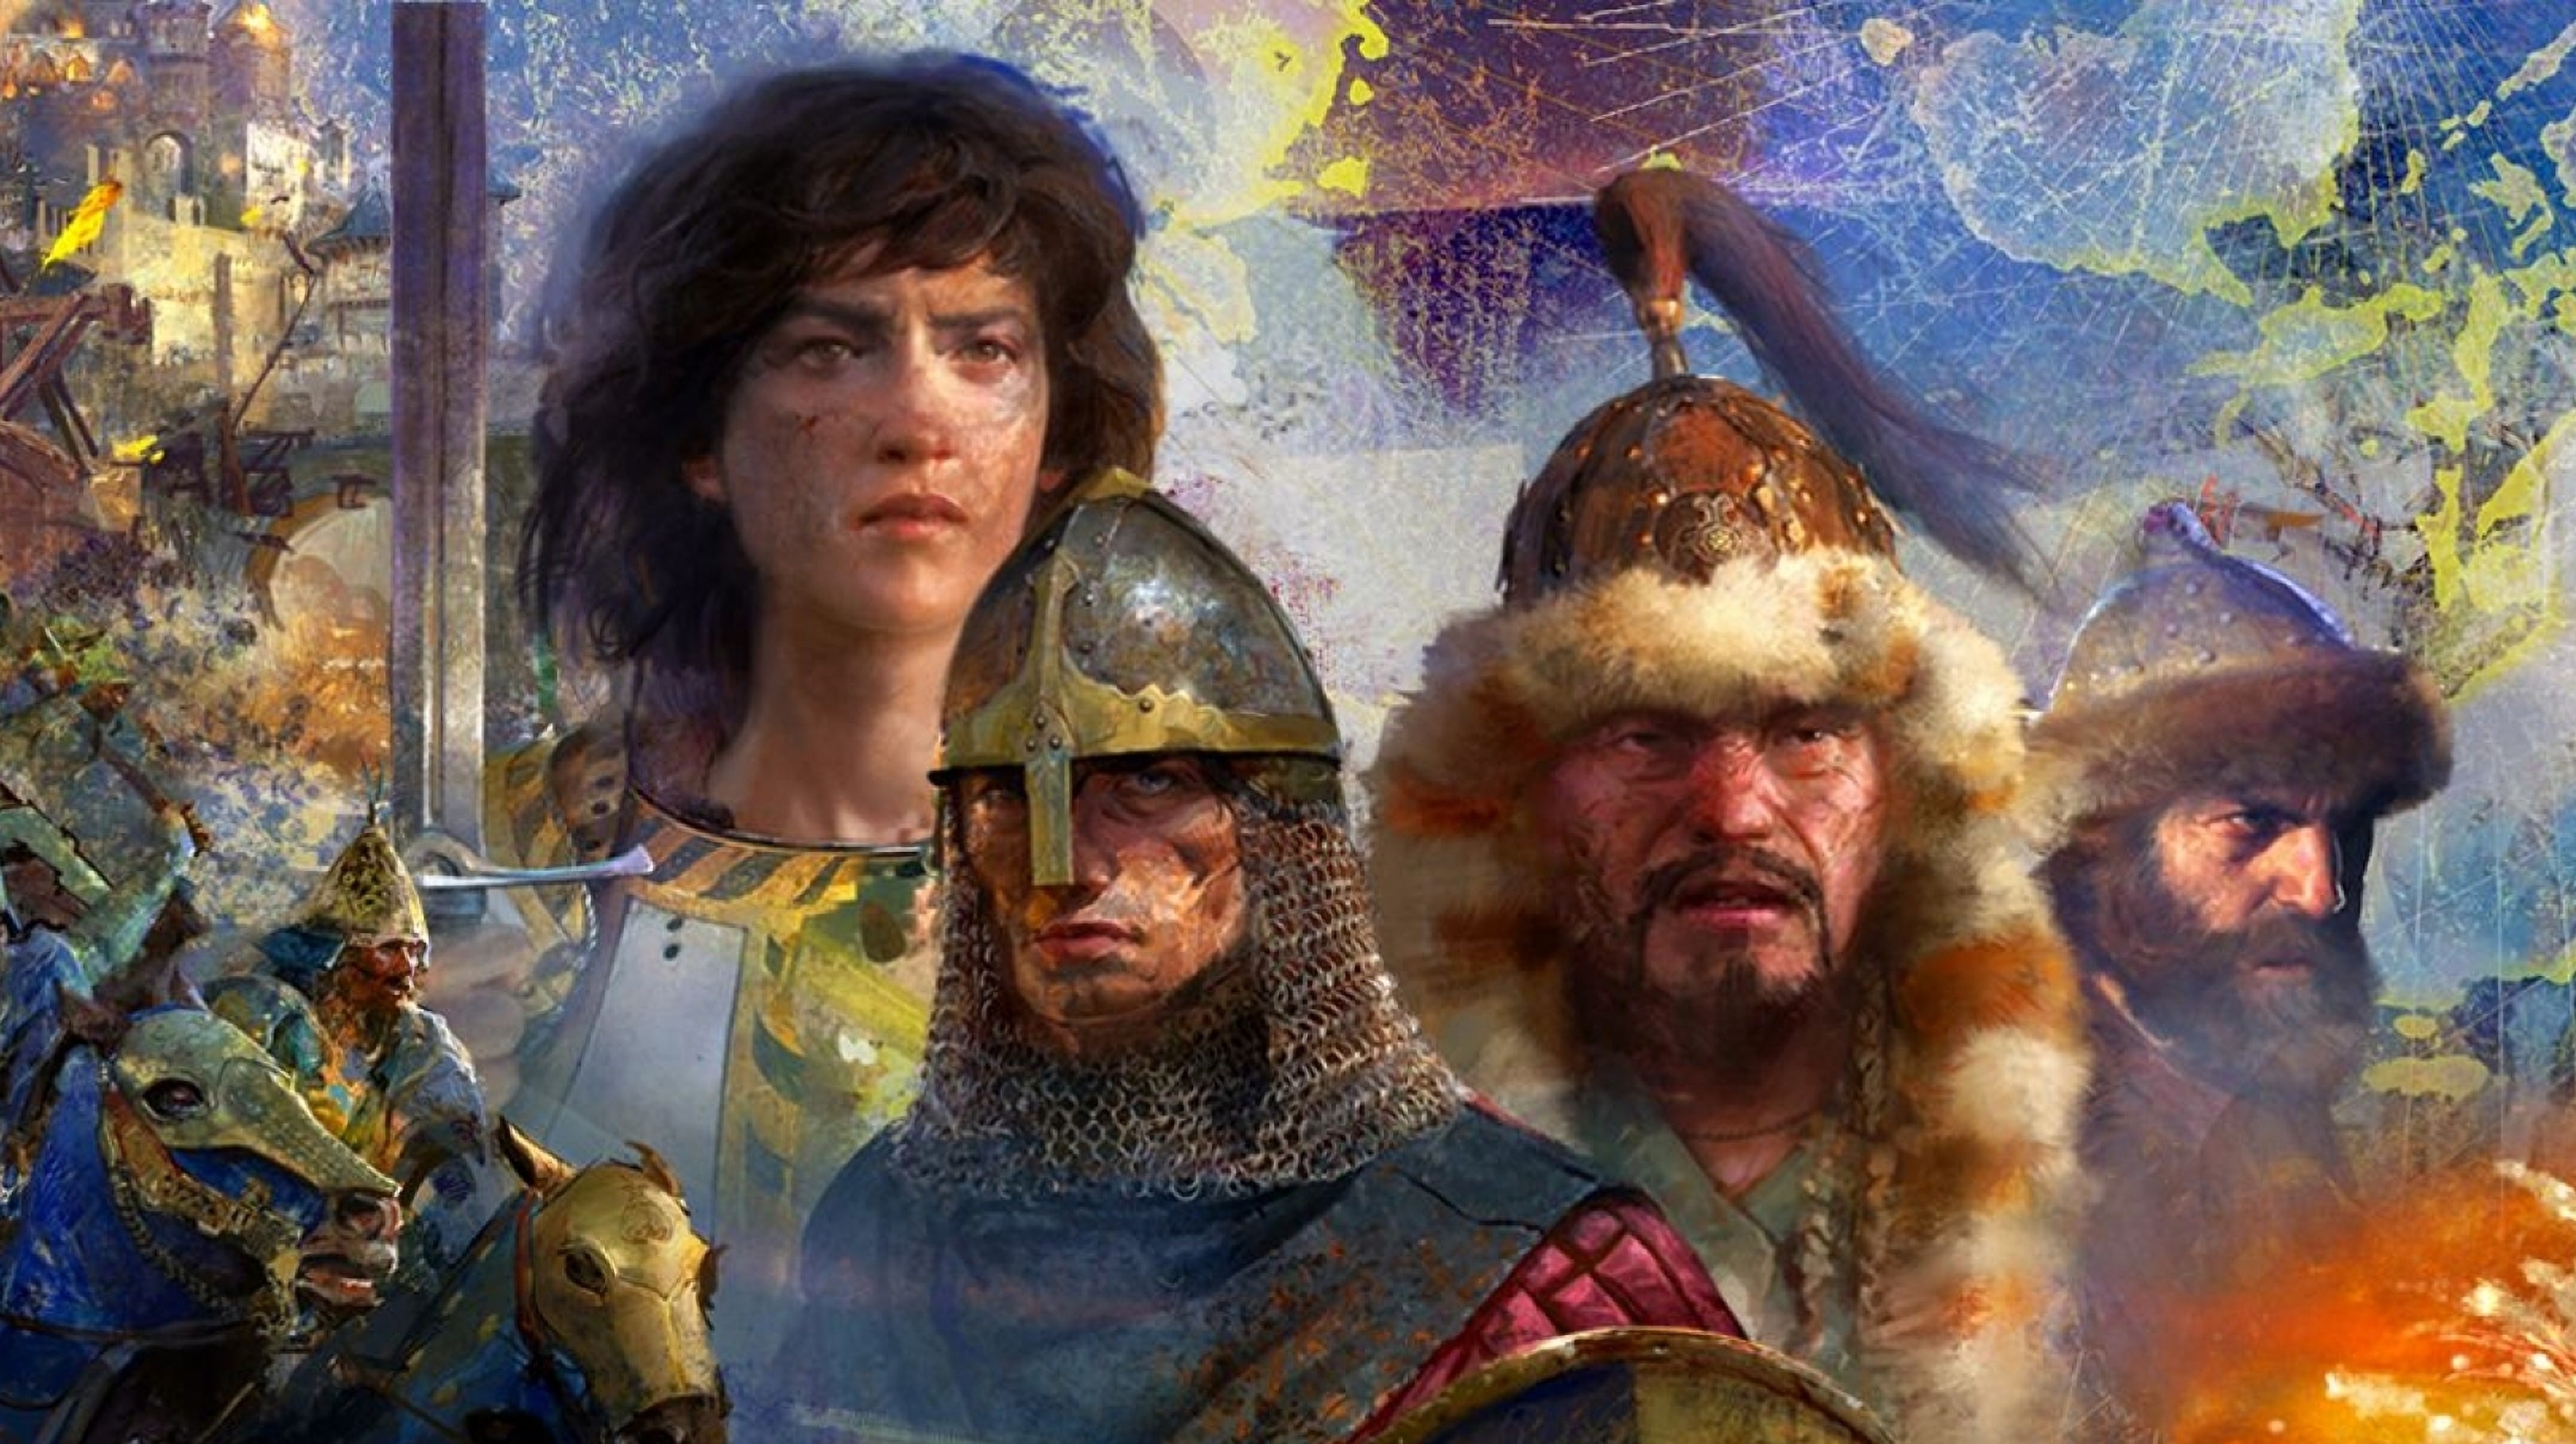 Image for Age of Empires 4: an excellent RTS - but tech problems need addressing